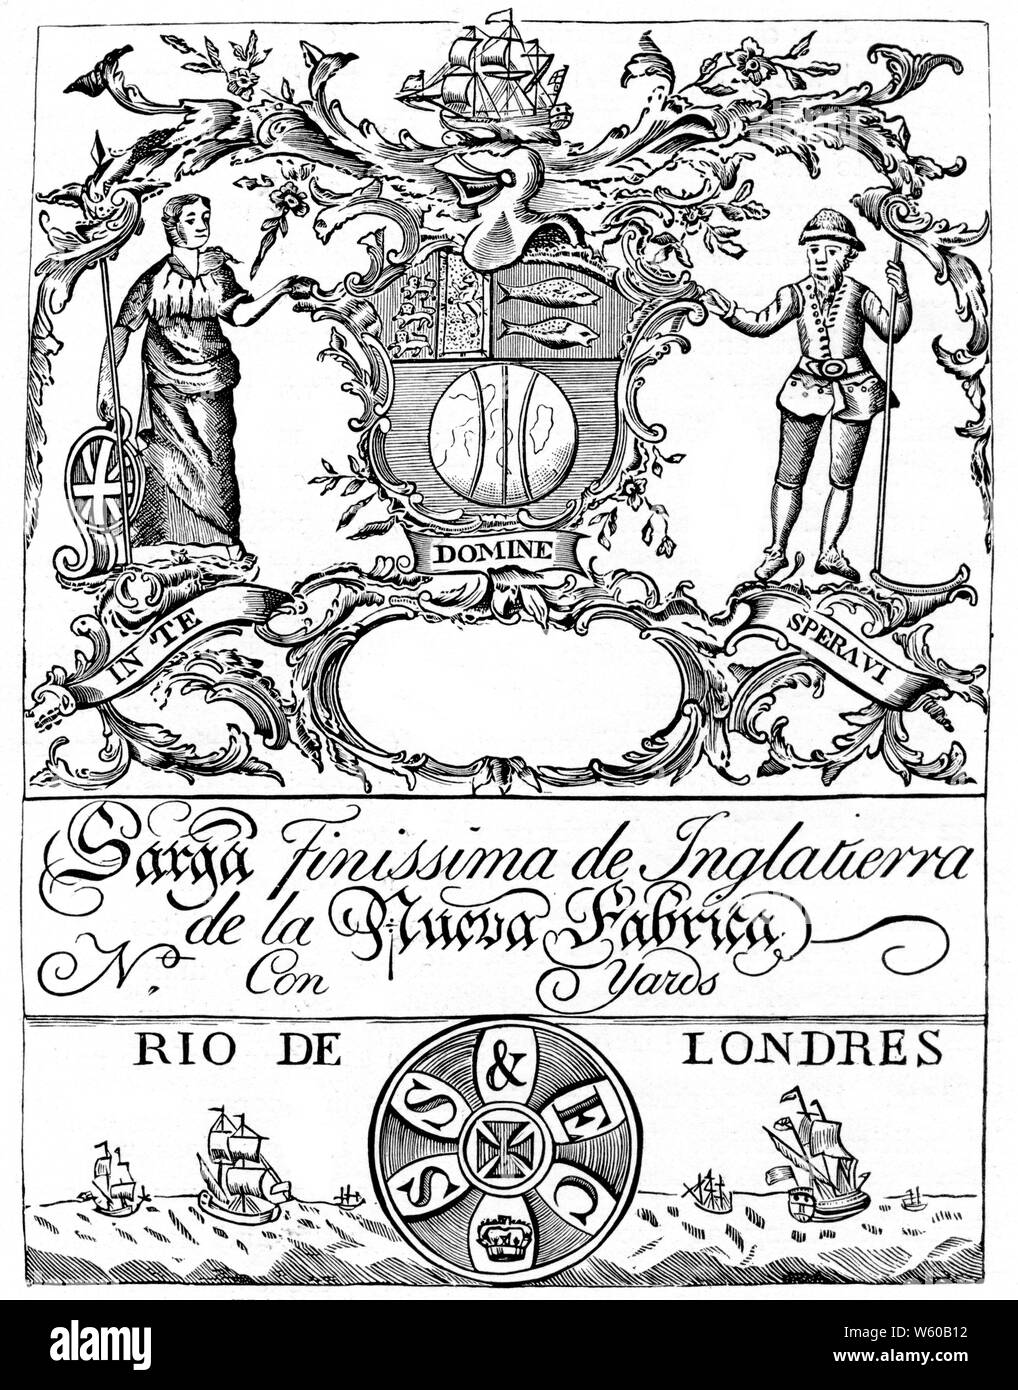 Trade label of the South Sea Company, c18th century. The South Sea Company was founded in 1711 with a view to restructuring government debt and restoring public credit. Stock Photo